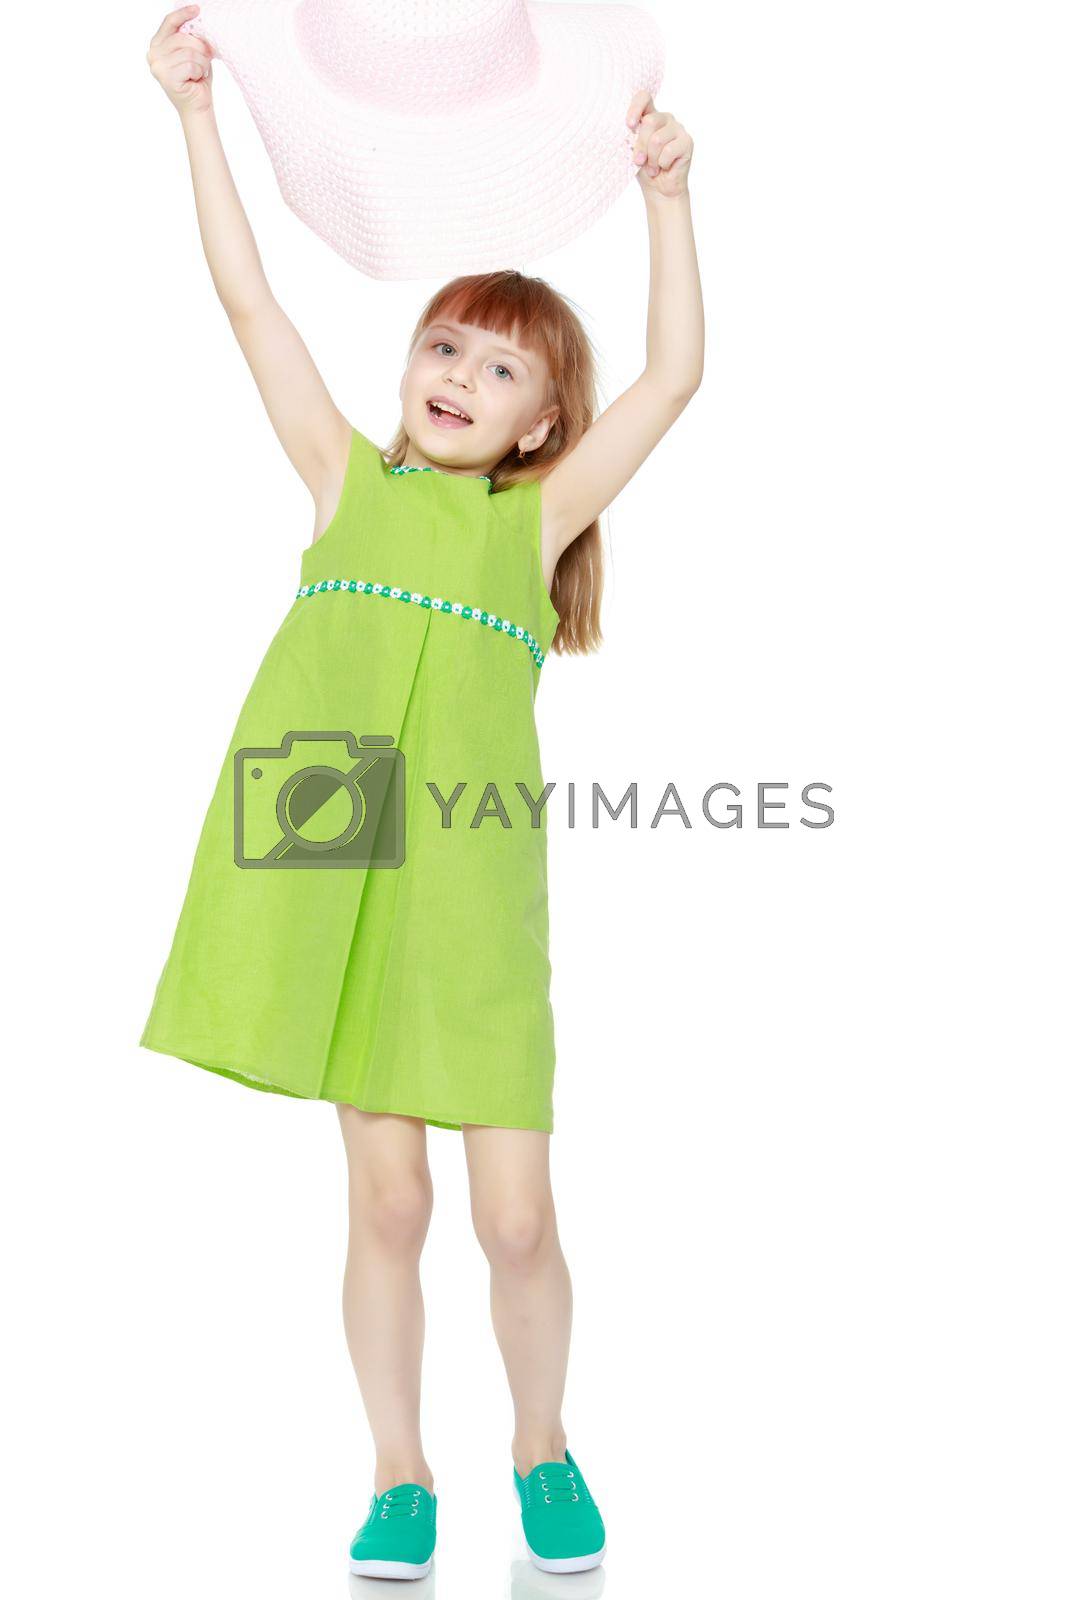 Royalty free image of A little girl in a summer green dress. by kolesnikov_studio